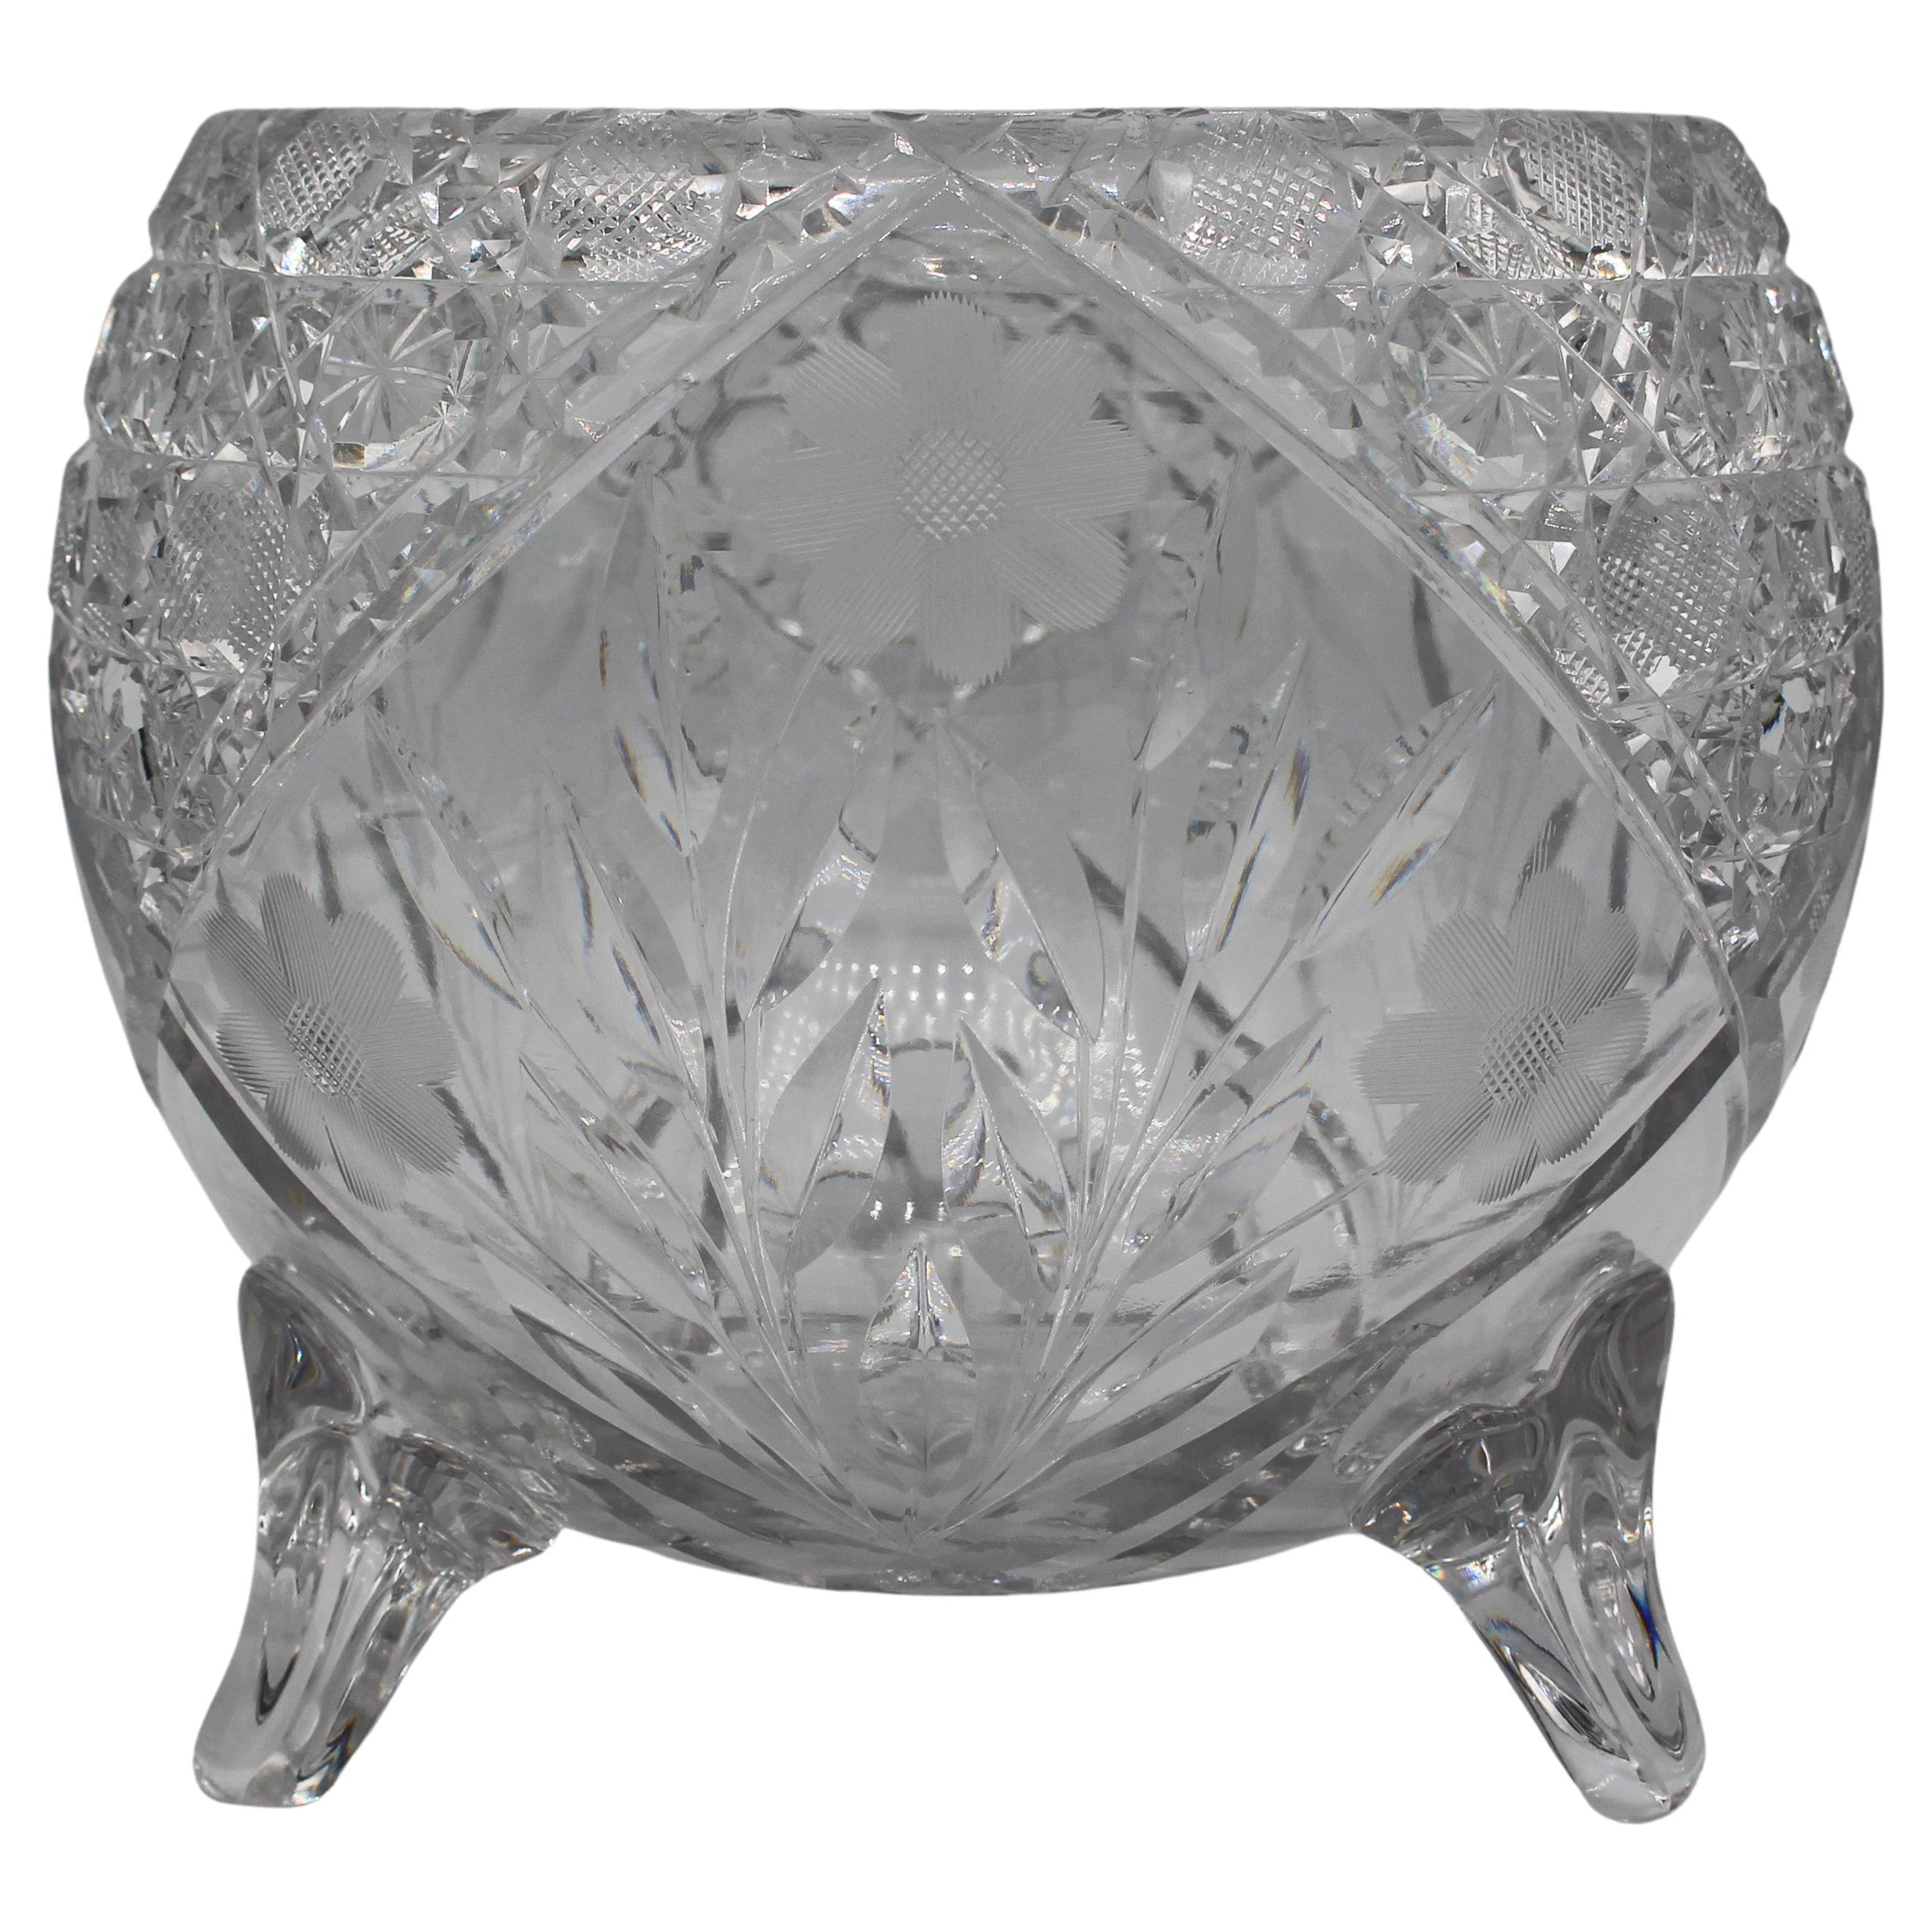 circa 1900 American Brilliant Cut Glass Footed Rose Bowl For Sale